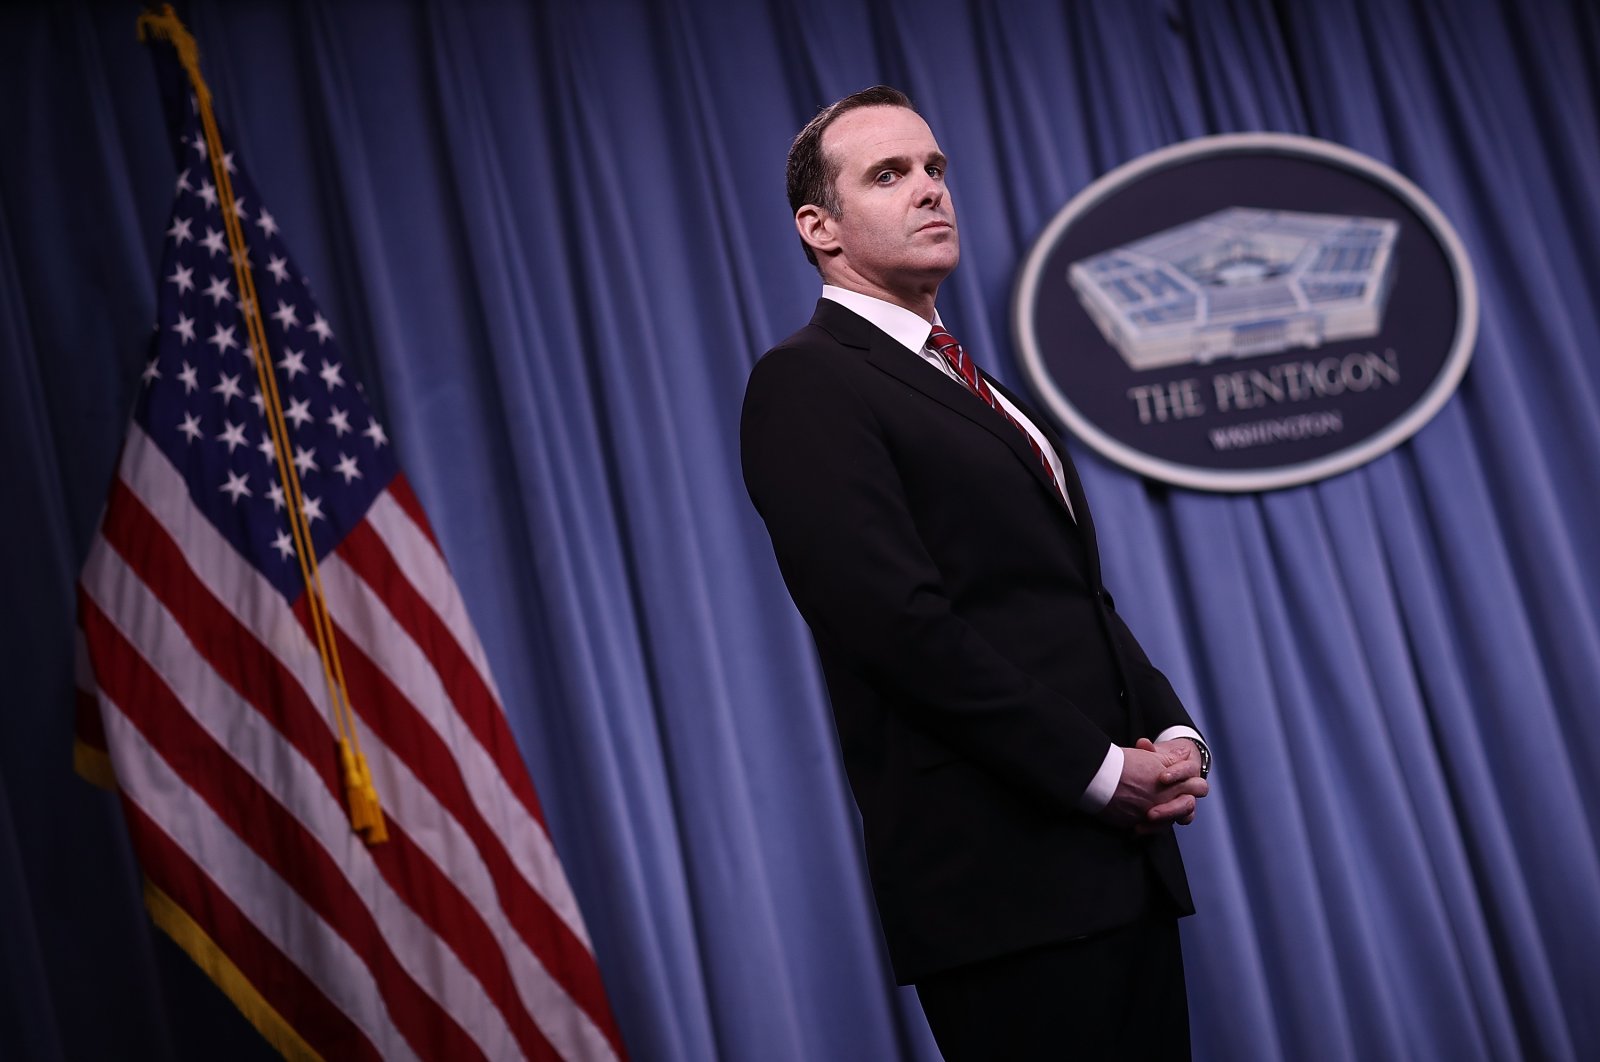 Brett McGurk, then U.S. envoy for the global coalition against Daesh, listens to questions from reporters during a Pentagon briefing, Virginia, U.S, May 19, 2017. (Photo by Getty Images)